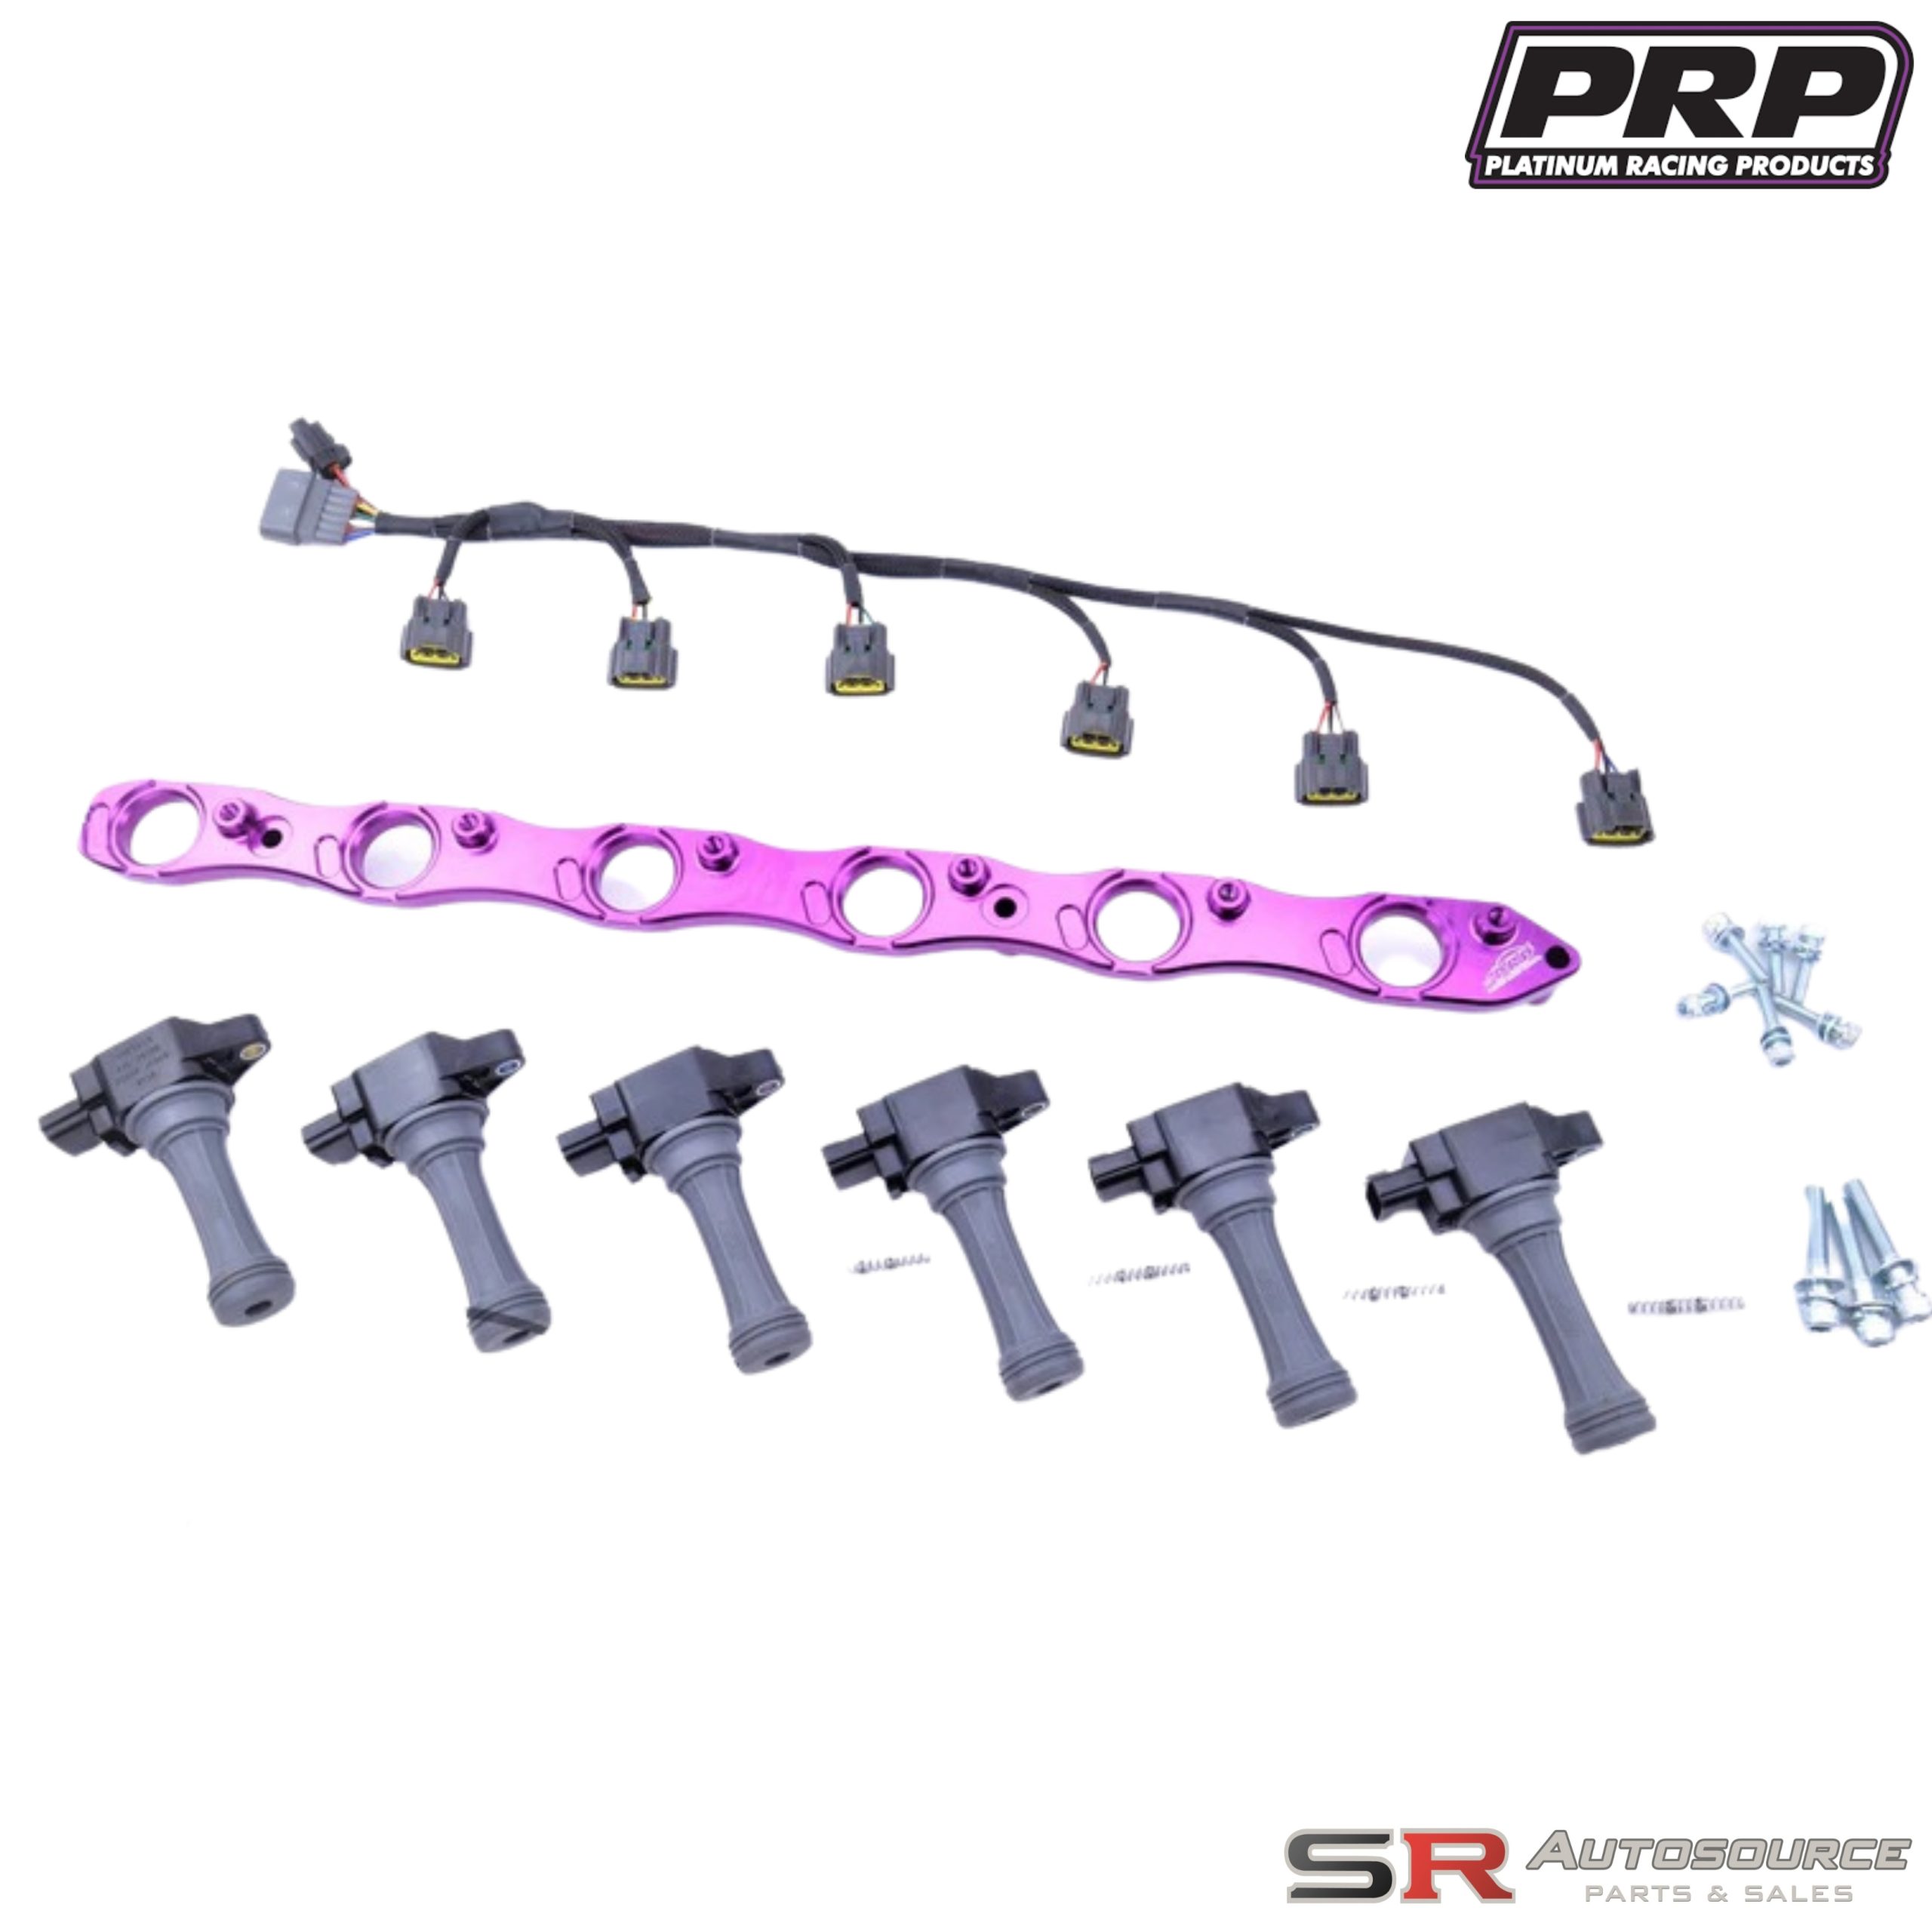 PRP Platinum Racing Products – RB VR38 Complete Coil Kit – RBTWINCOIL